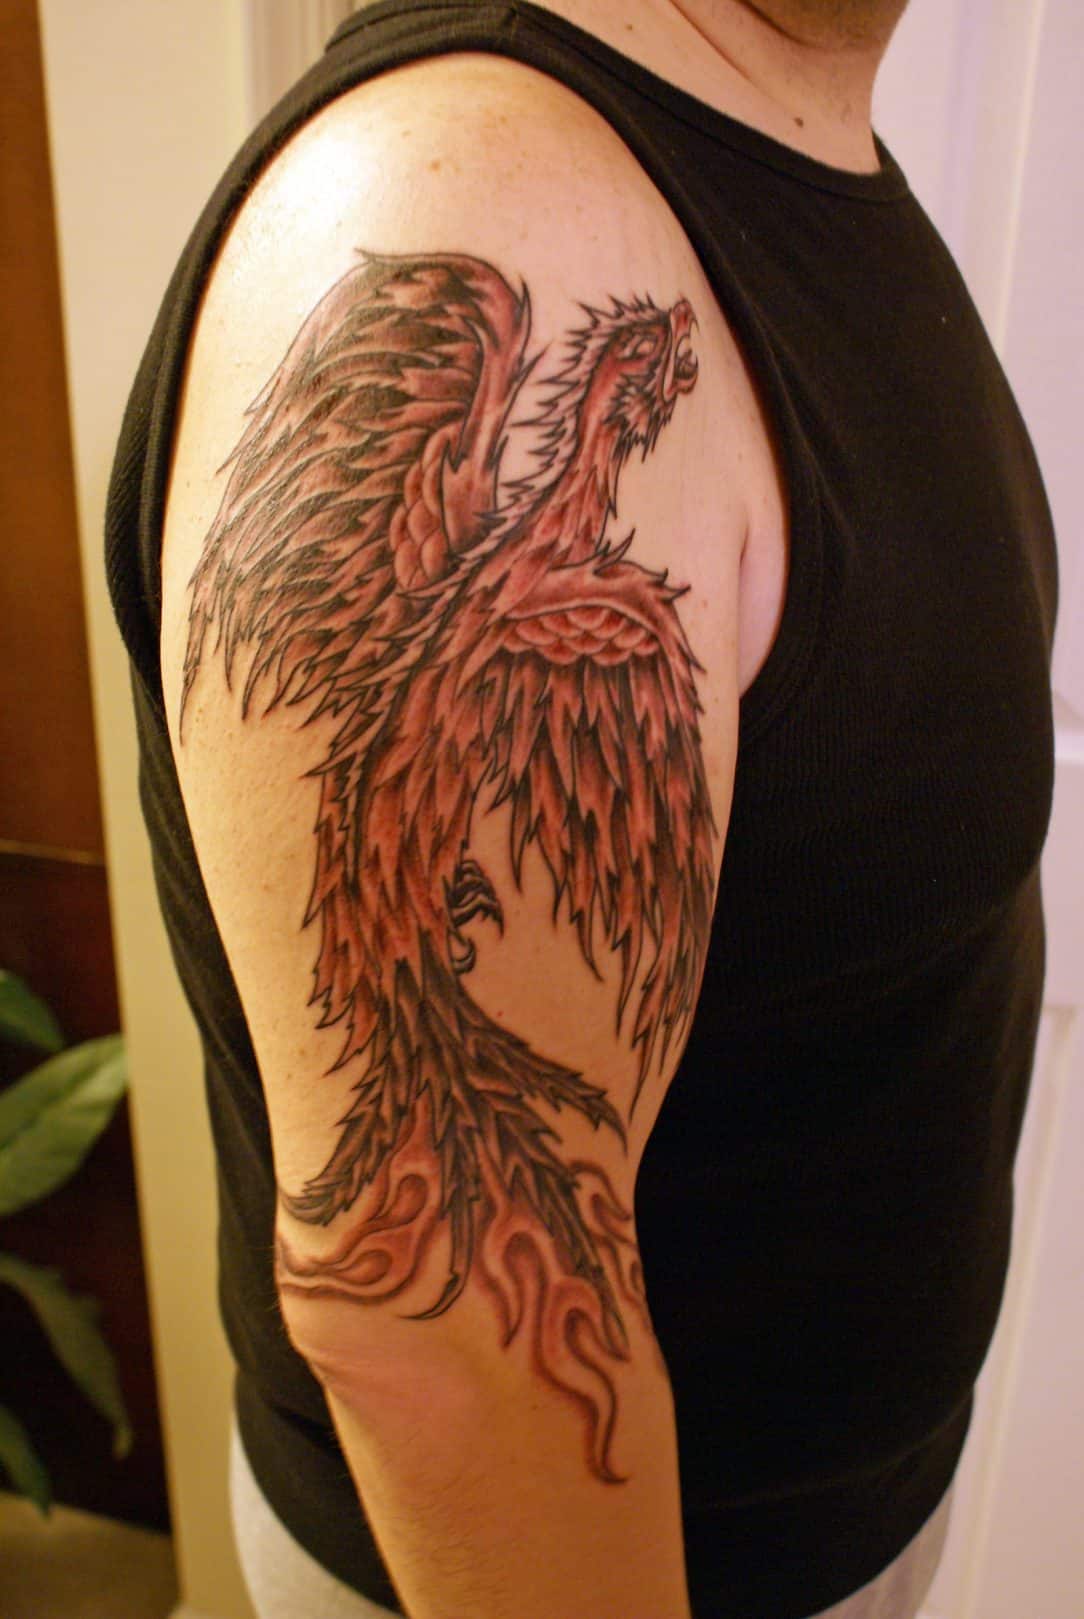 Symbolic Meanings of Phoenix Tattoos for Men